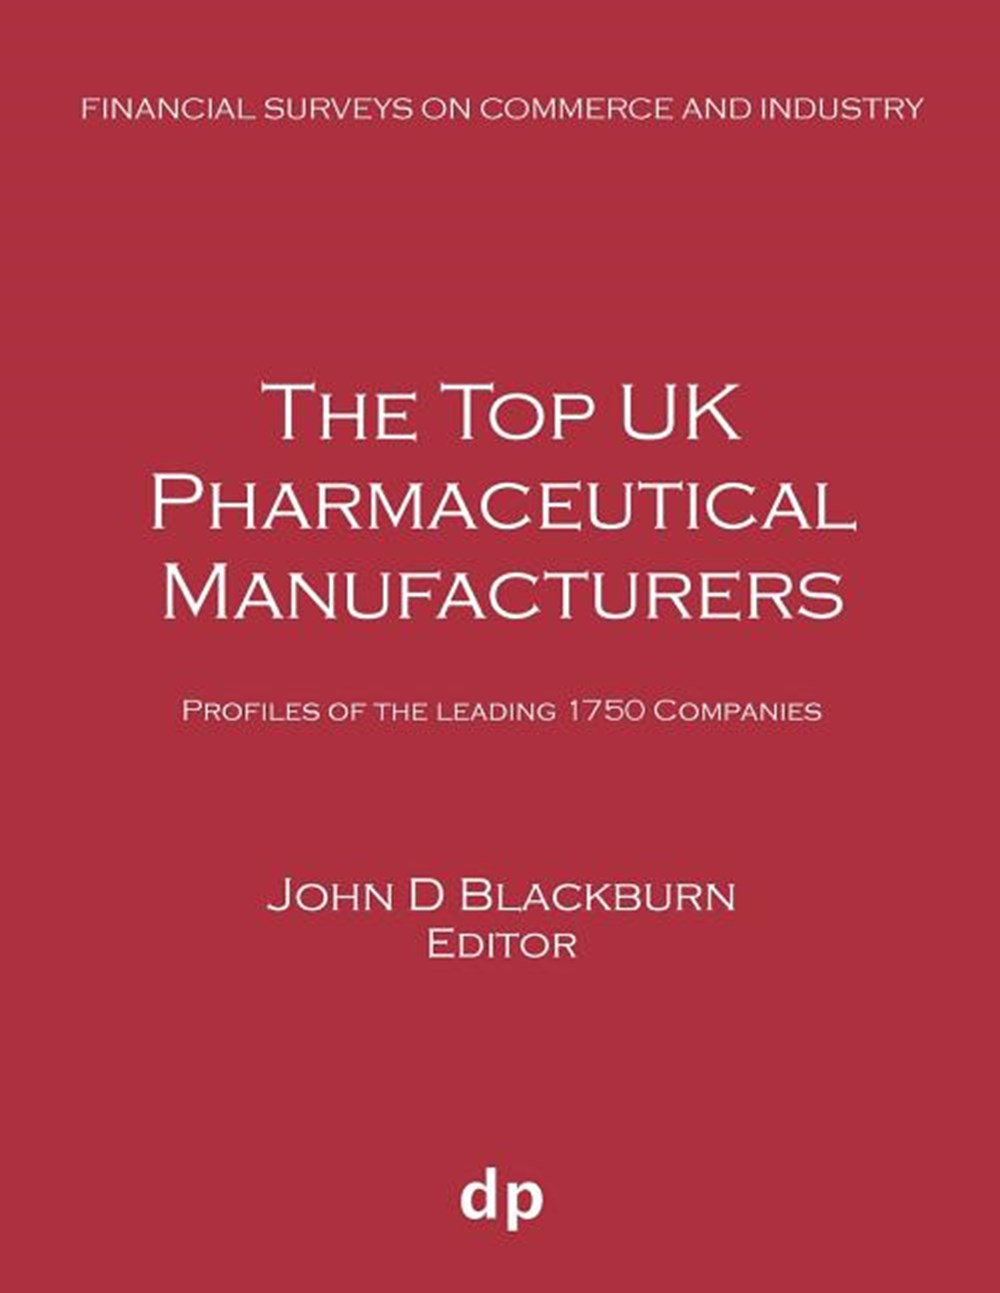 Top UK Pharmaceutical Manufacturers: Profiles of the leading 1750 companies (Summer 2019)